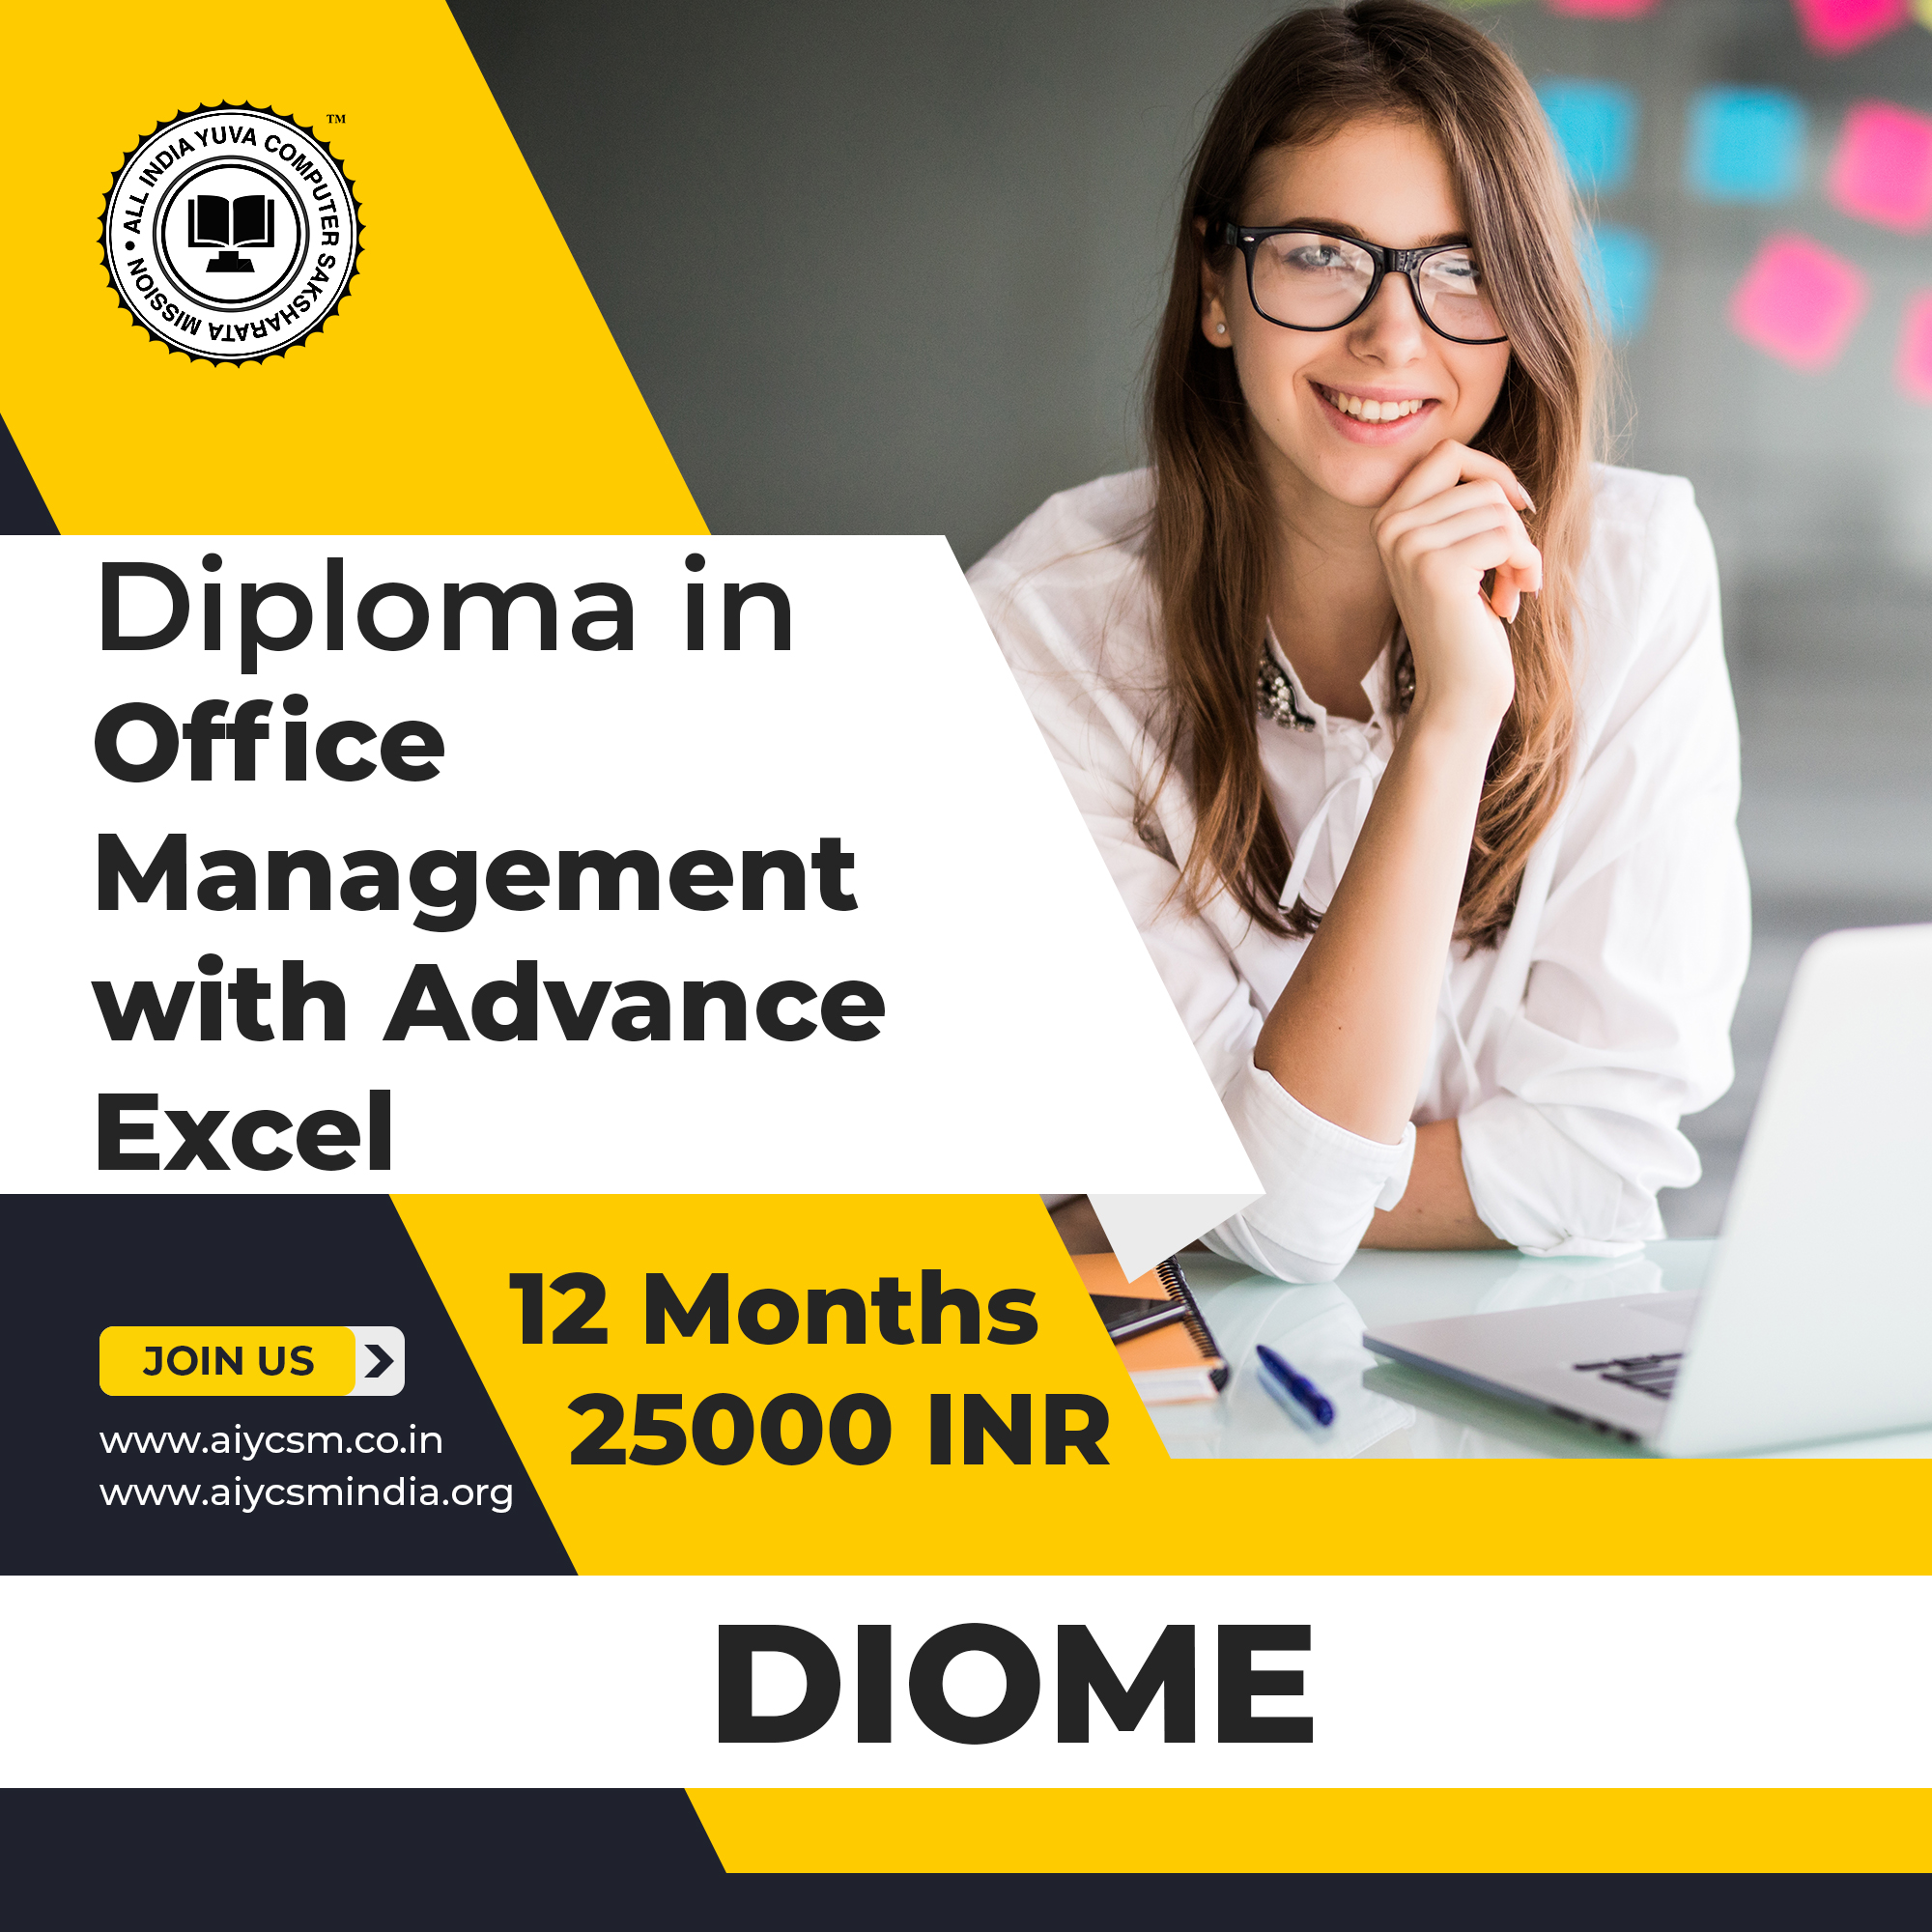 Diploma in Office Management with Advance Excel